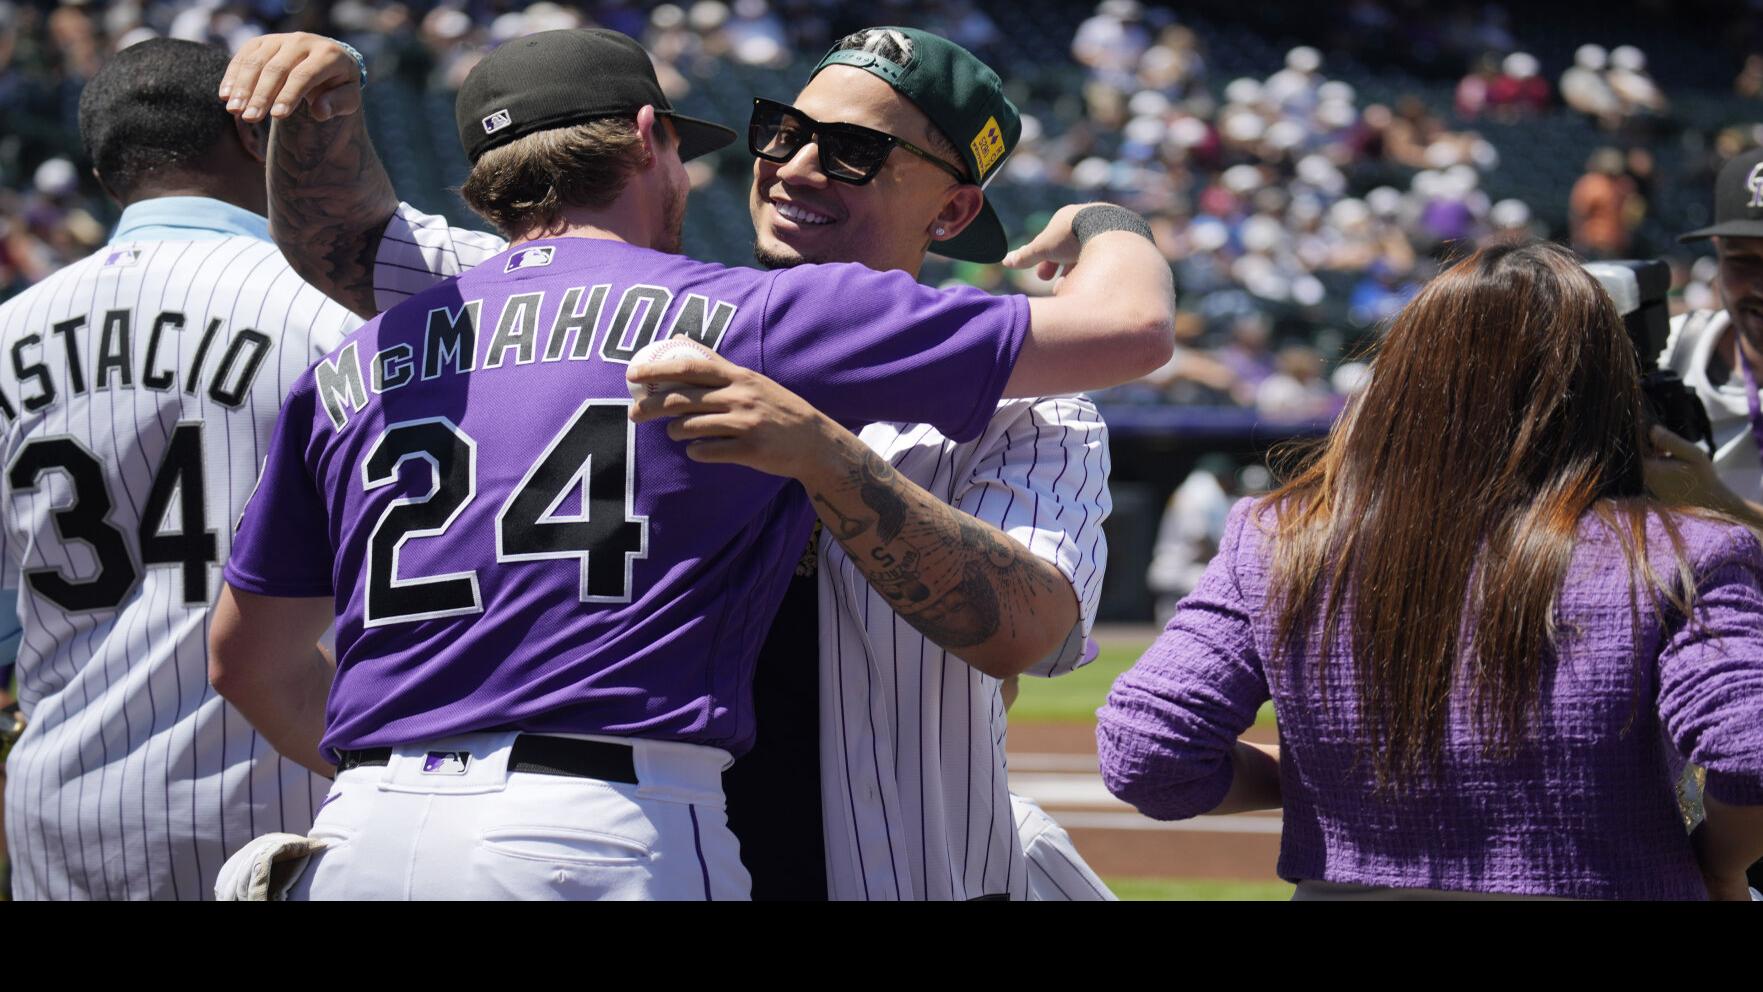 Colorado Rockies: Bud Black's choice for his Players Weekend jersey